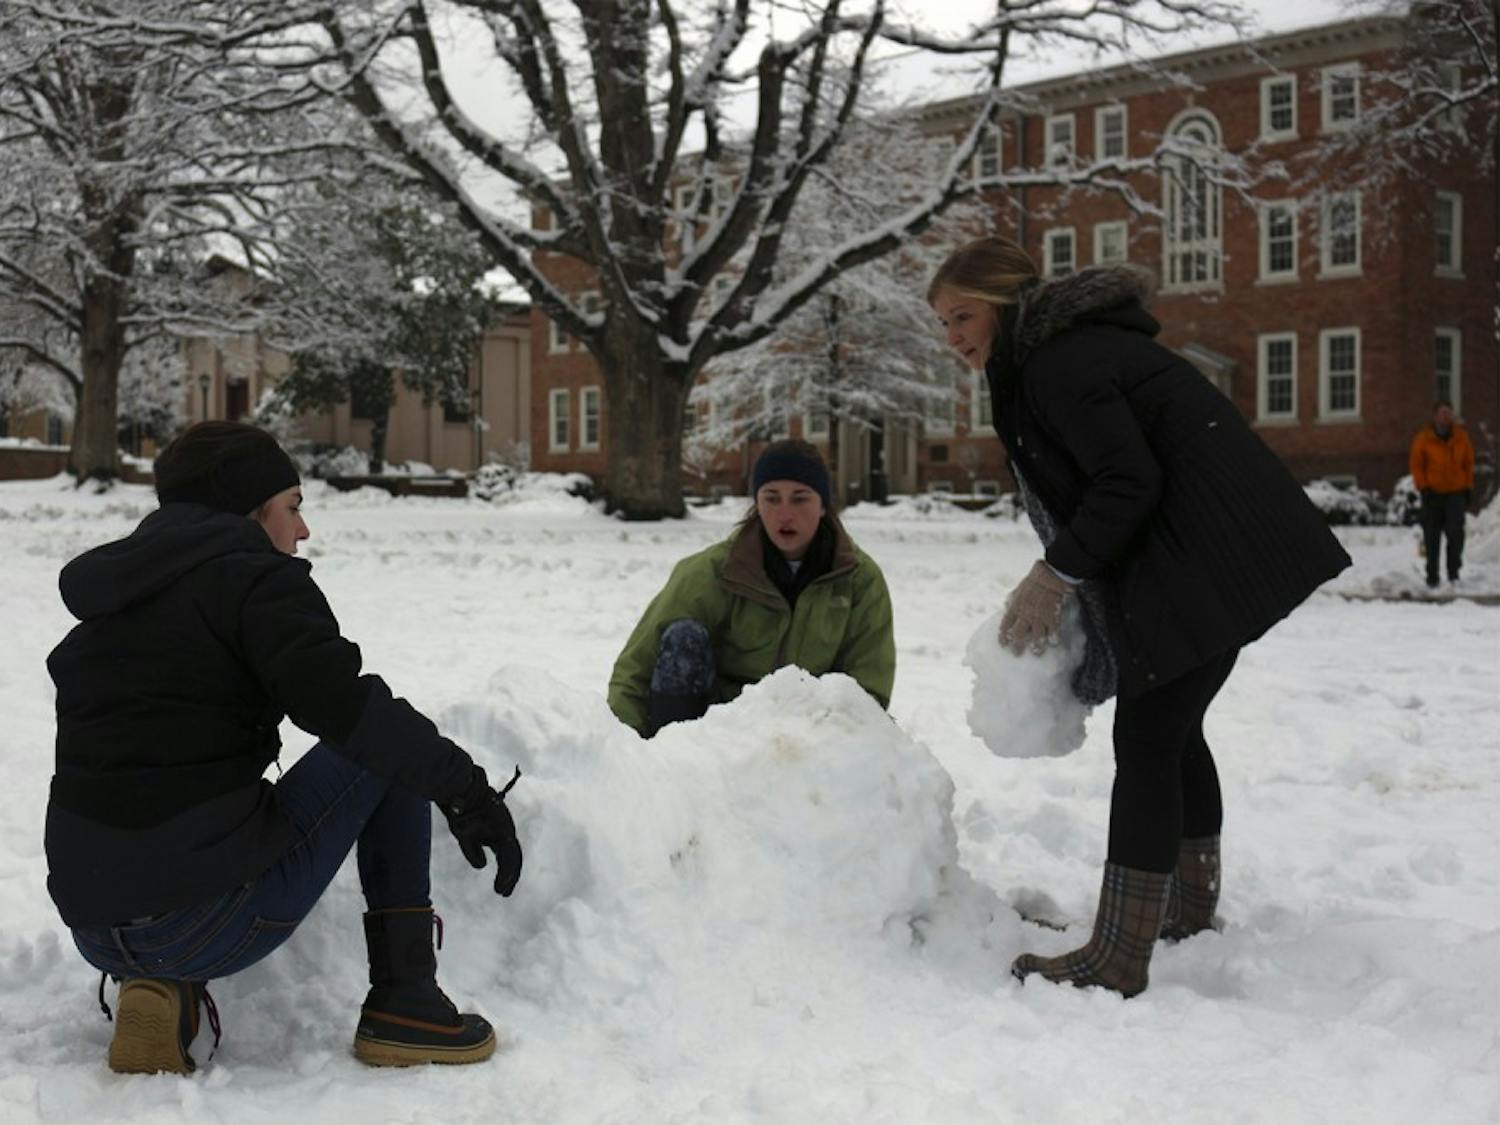 (From left to right) Megan Carlin, Sinclair McLean and Sarah Graves build an igloo on the lower quad in front of South Building on Thursday.